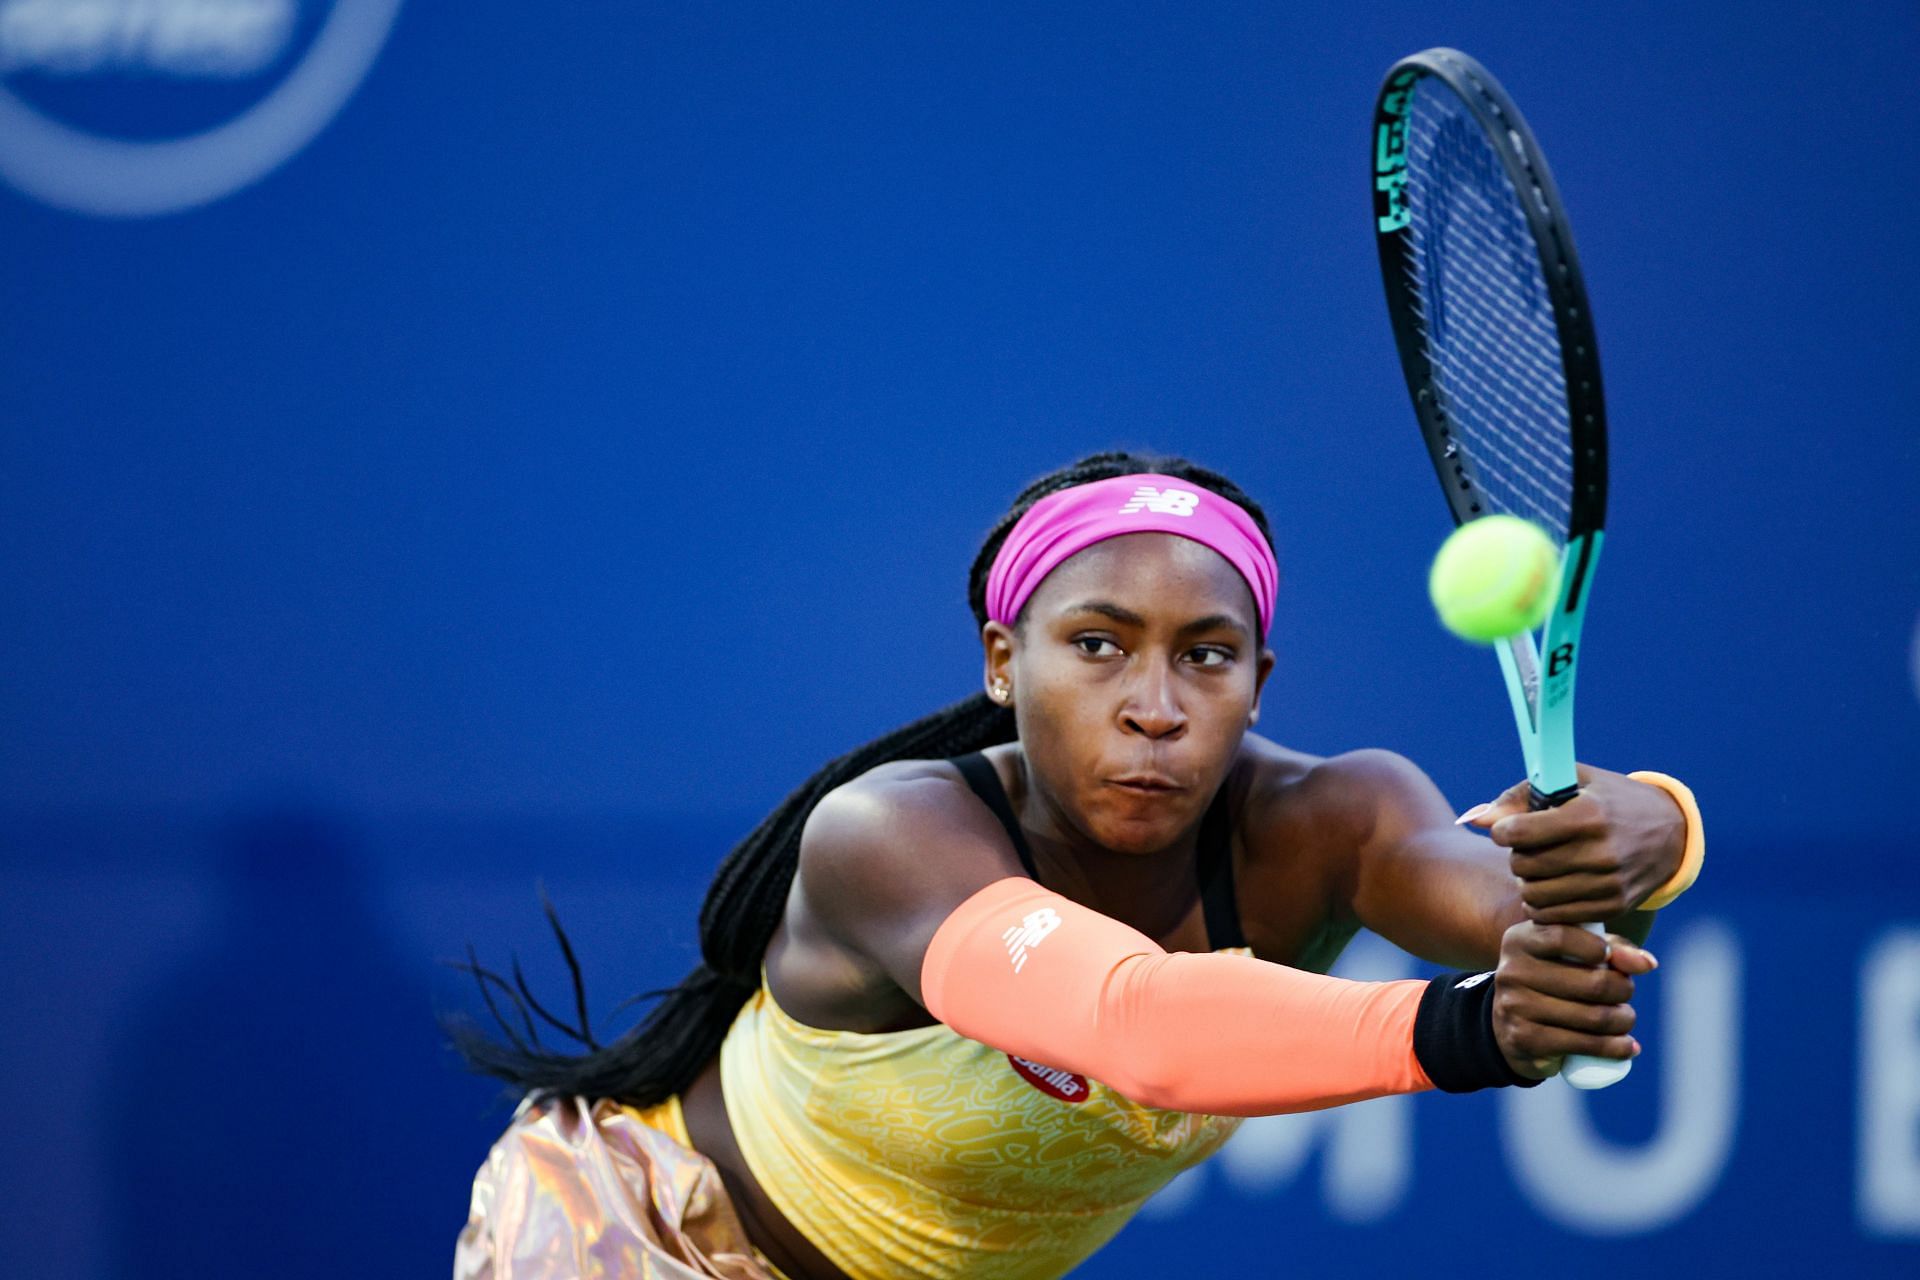 Coco Gauff plays a near flawless match against &lt;a href=&#039;https://www.sportskeeda.com/player/anhelina-kalinina&#039; target=&#039;_blank&#039; rel=&#039;noopener noreferrer&#039;&gt;Anhelina Kalinina&lt;/a&gt; in the first round in San Jose.